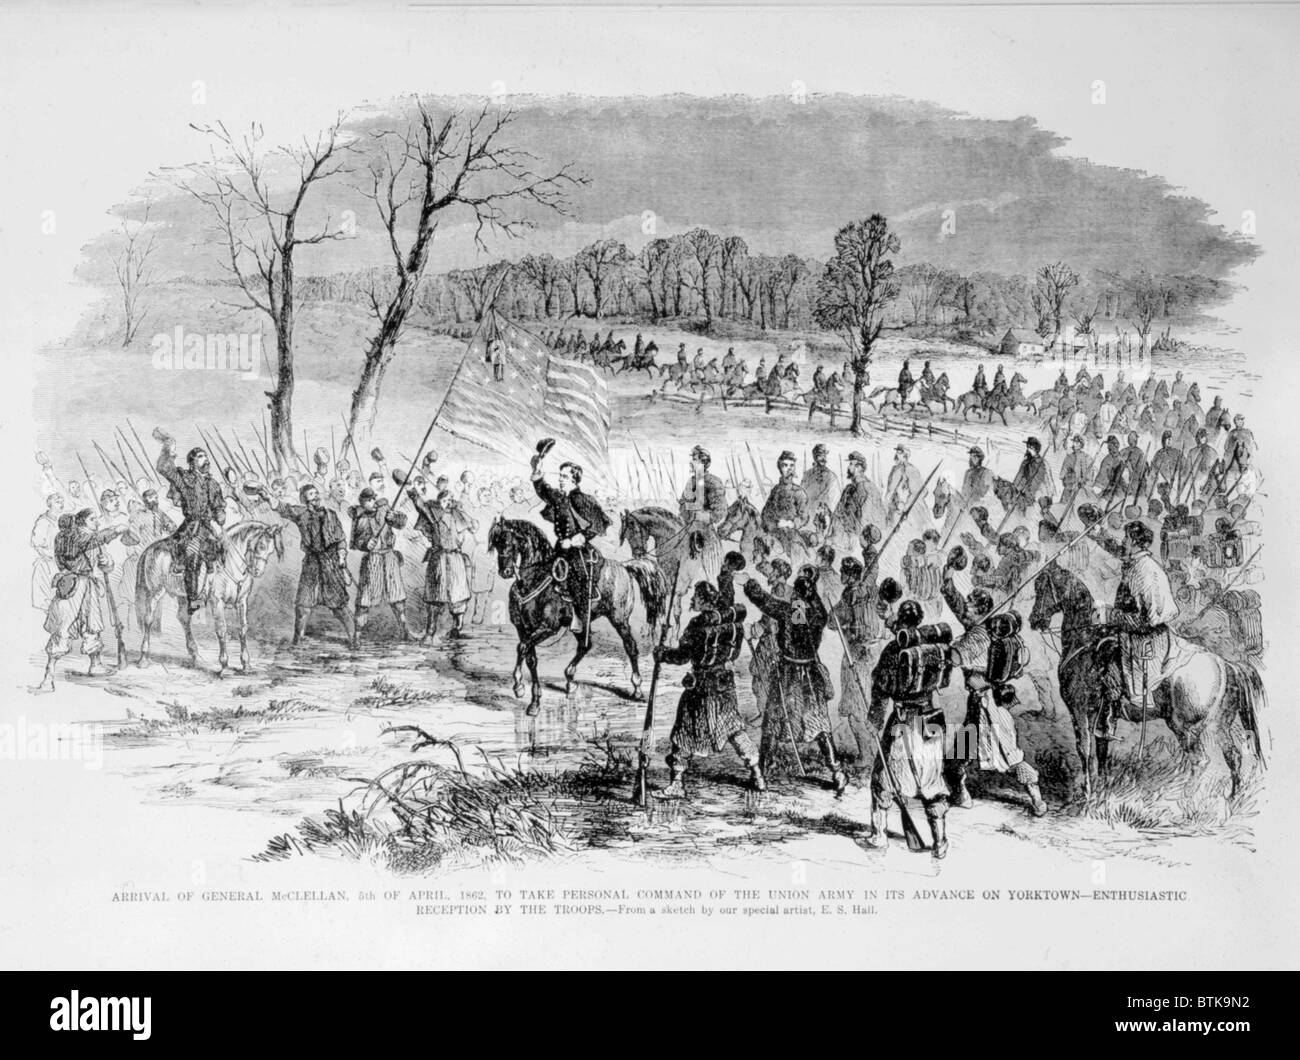 The arrival of General George McClellan to take command of the Union troops, April 5, 1862, from Leslie's Weekly Stock Photo